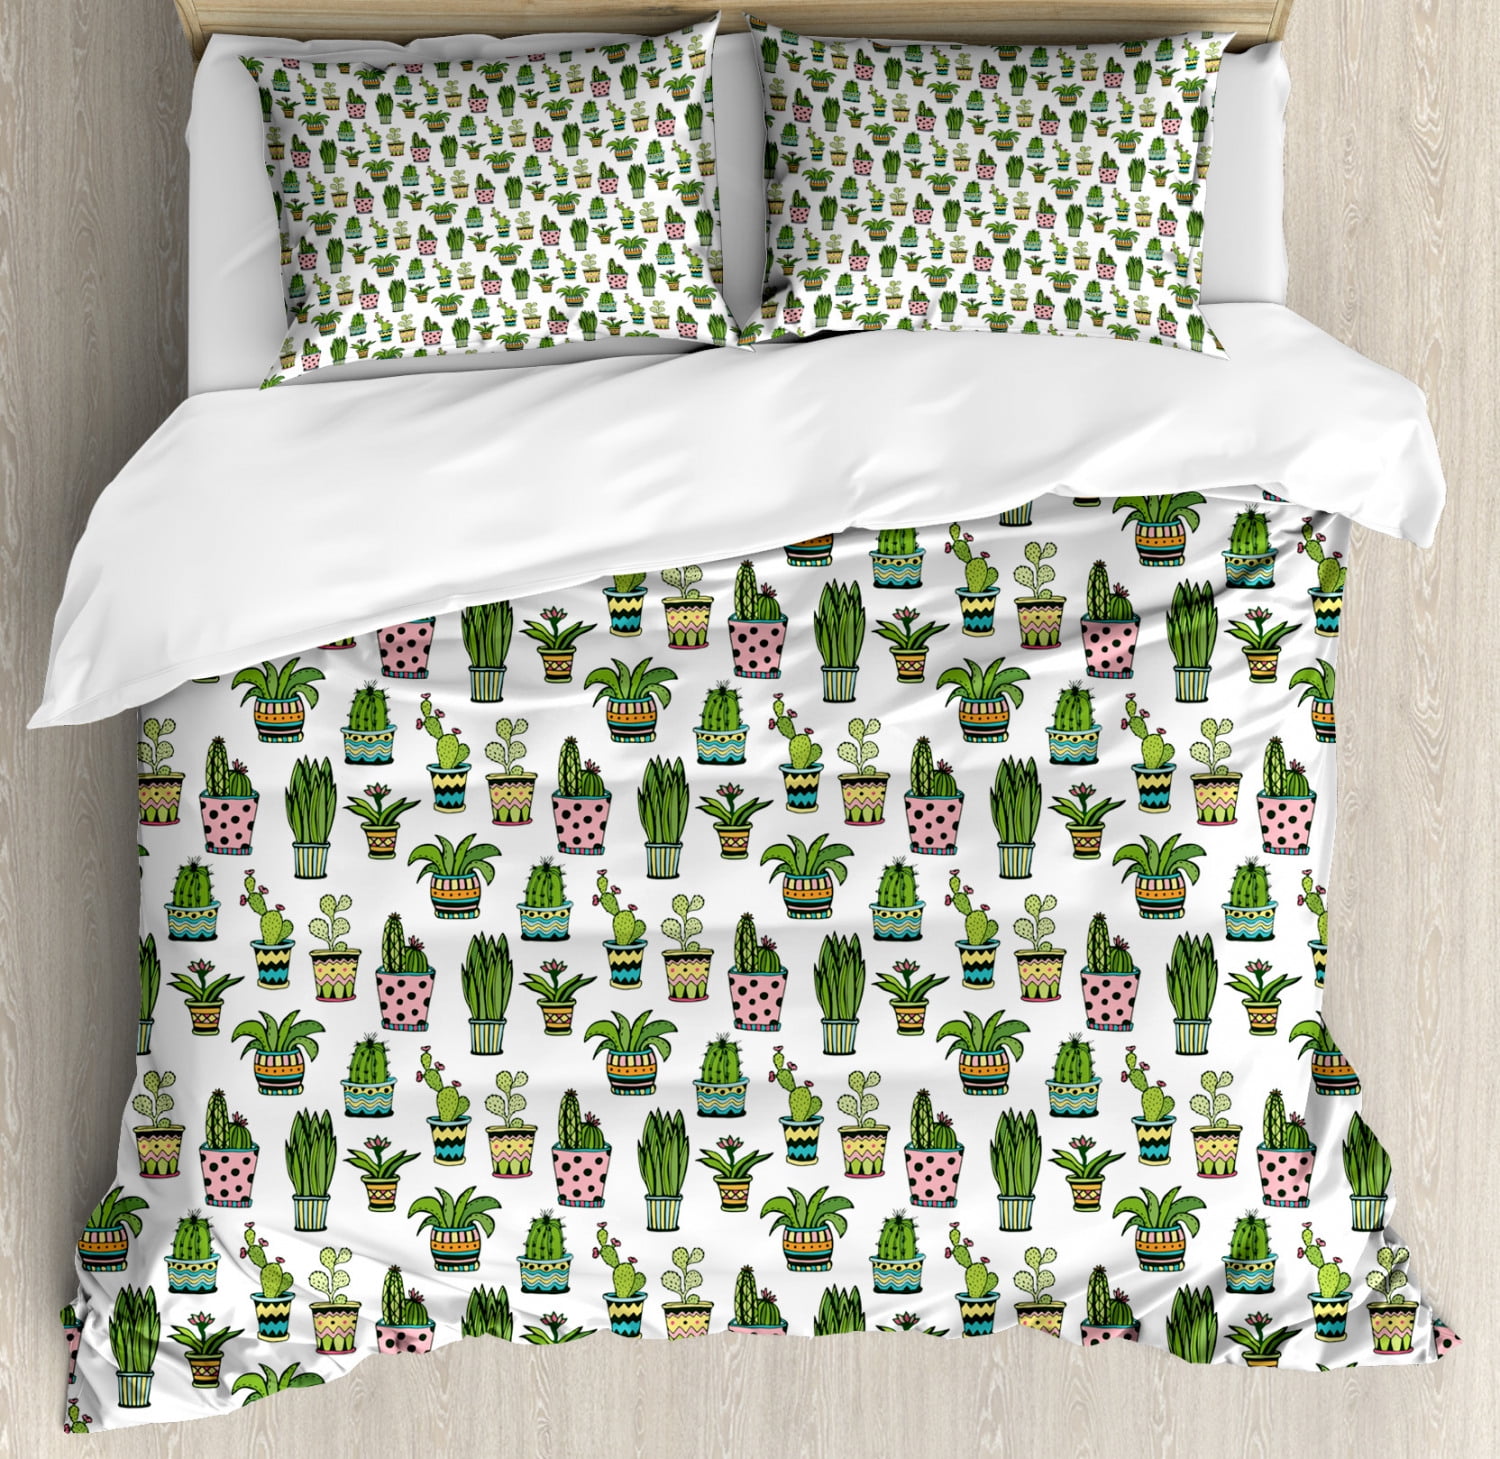 Decorative 3 Piece Bedding Set with 2 Pillow Shams Ambesonne Cactus Duvet Cover Set Pastel Green Queen Size Thorny Vintage Hawaiian Nature Flourishing Succulents and Cactus Bouquets Picture